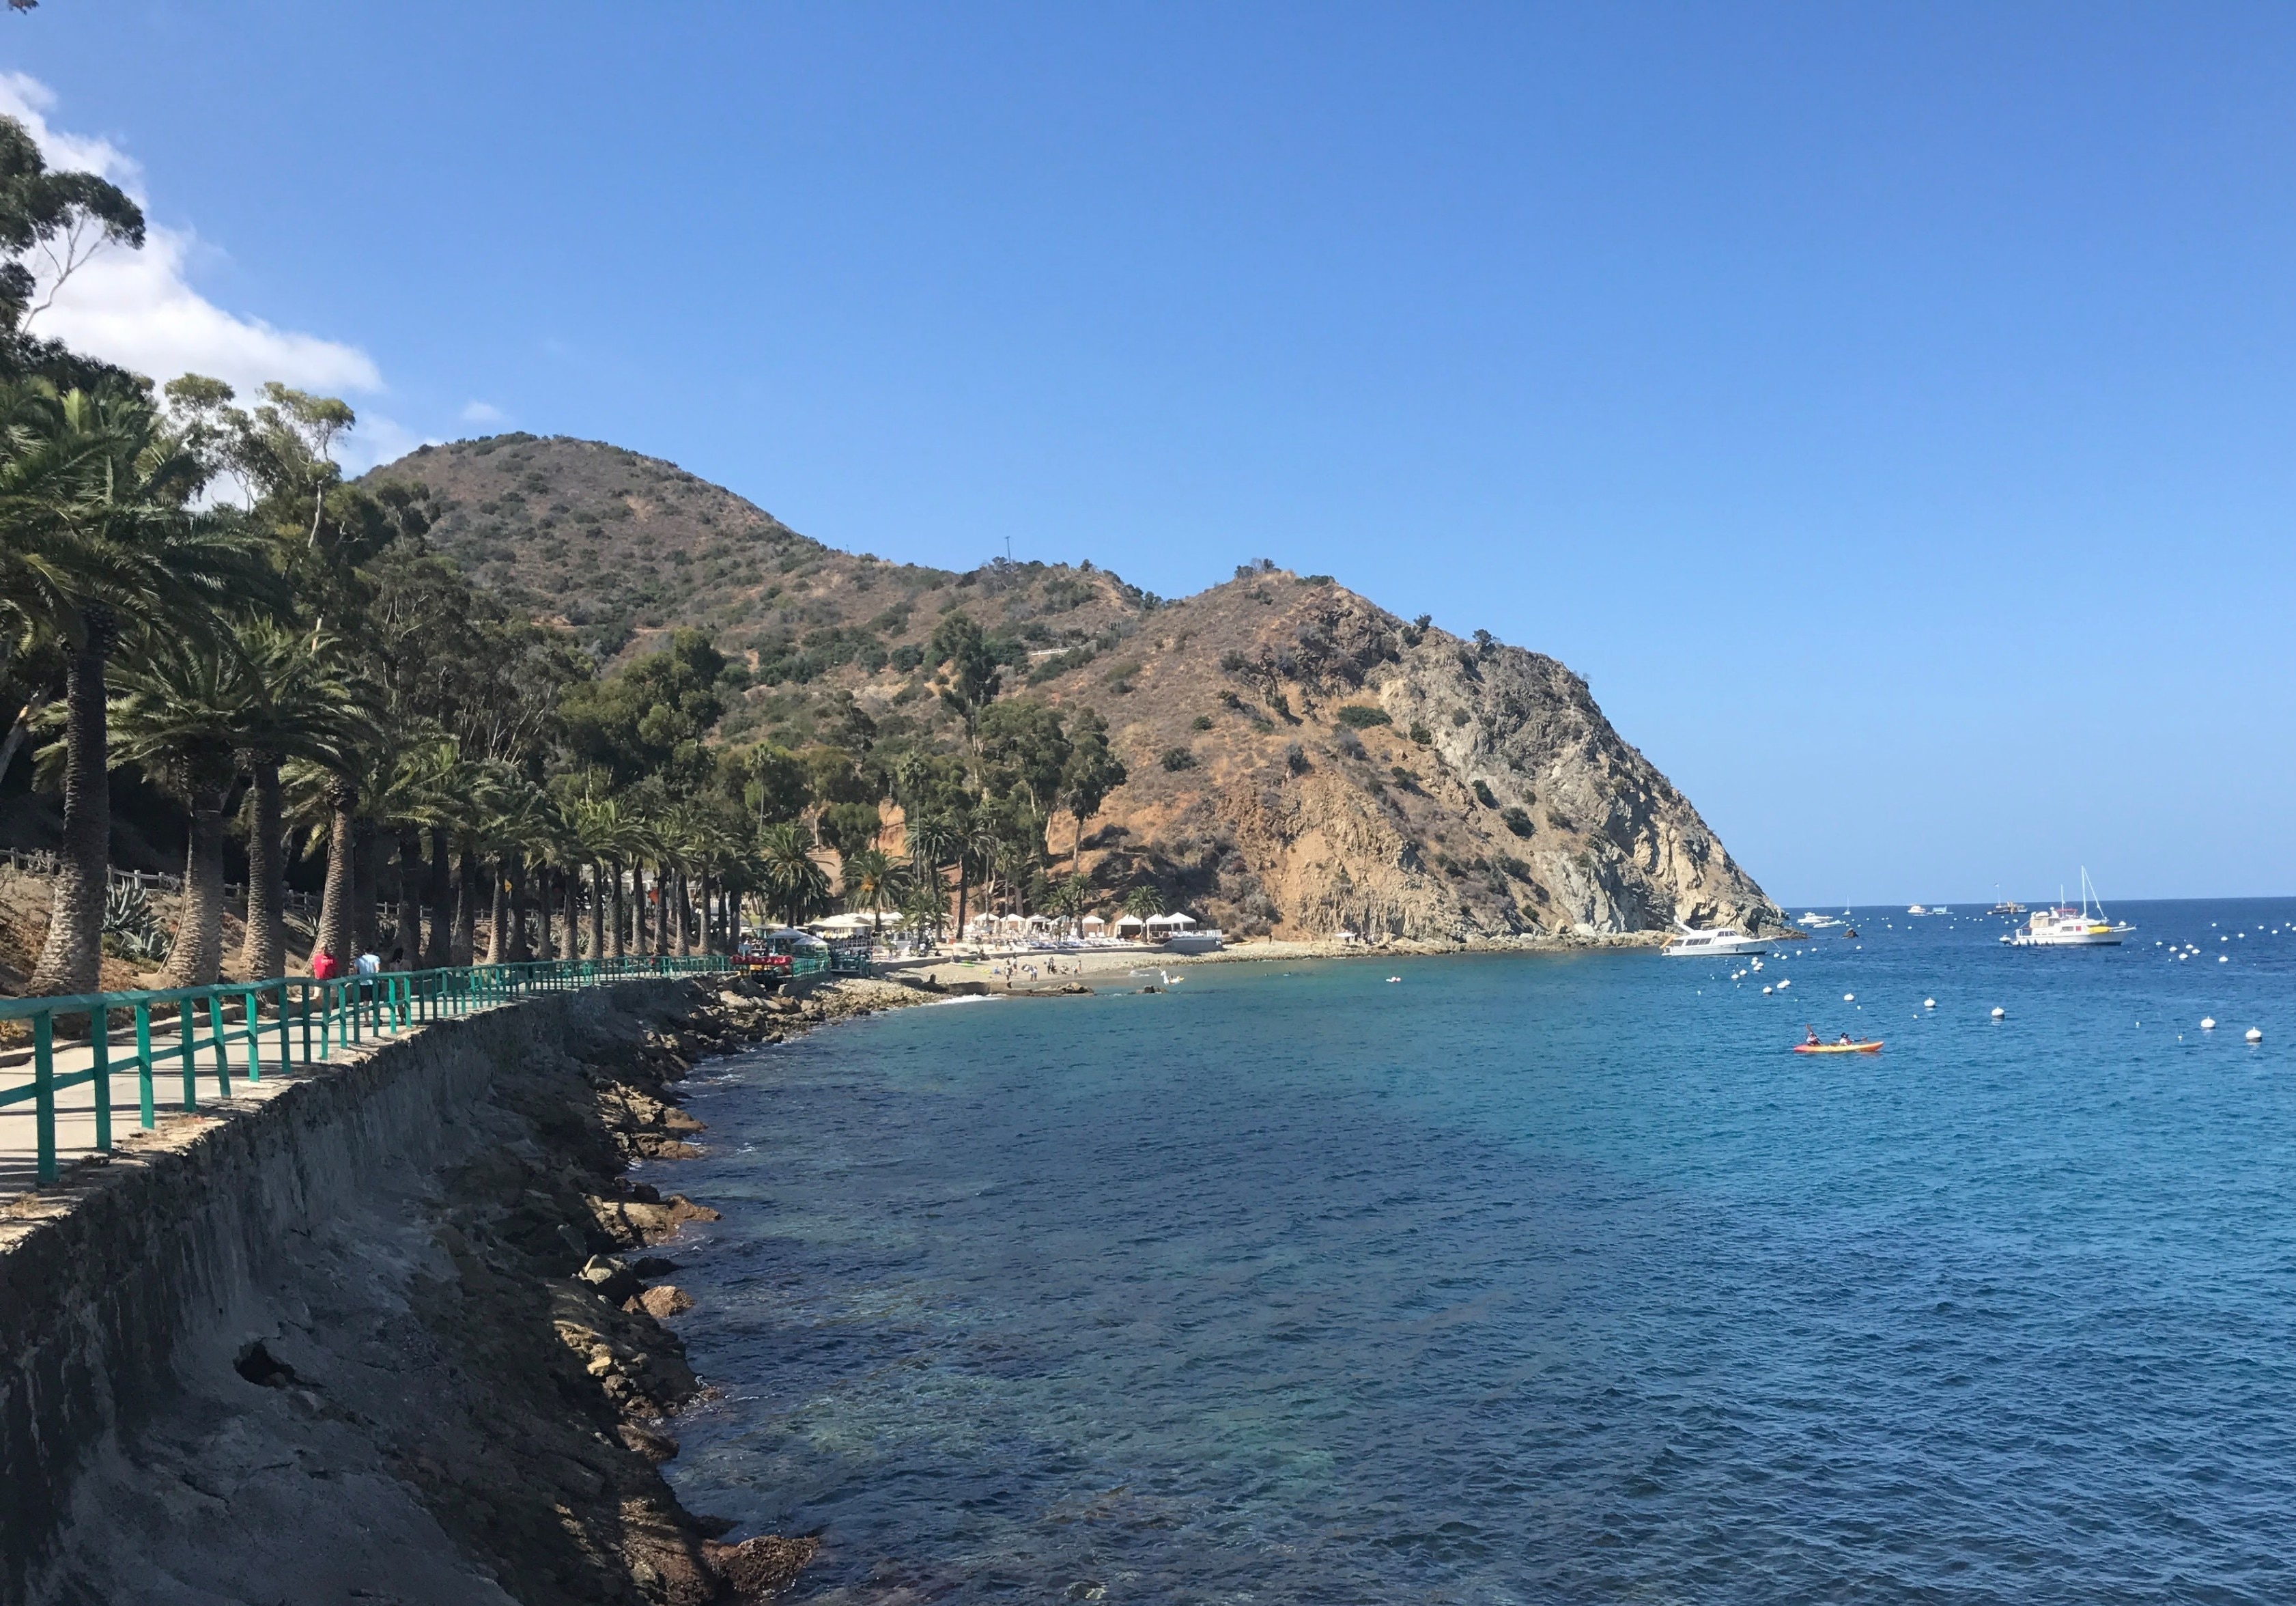 Catalina Island is only 22 miles from LA and makes for a good day trip from there. #LifeAtExpedia